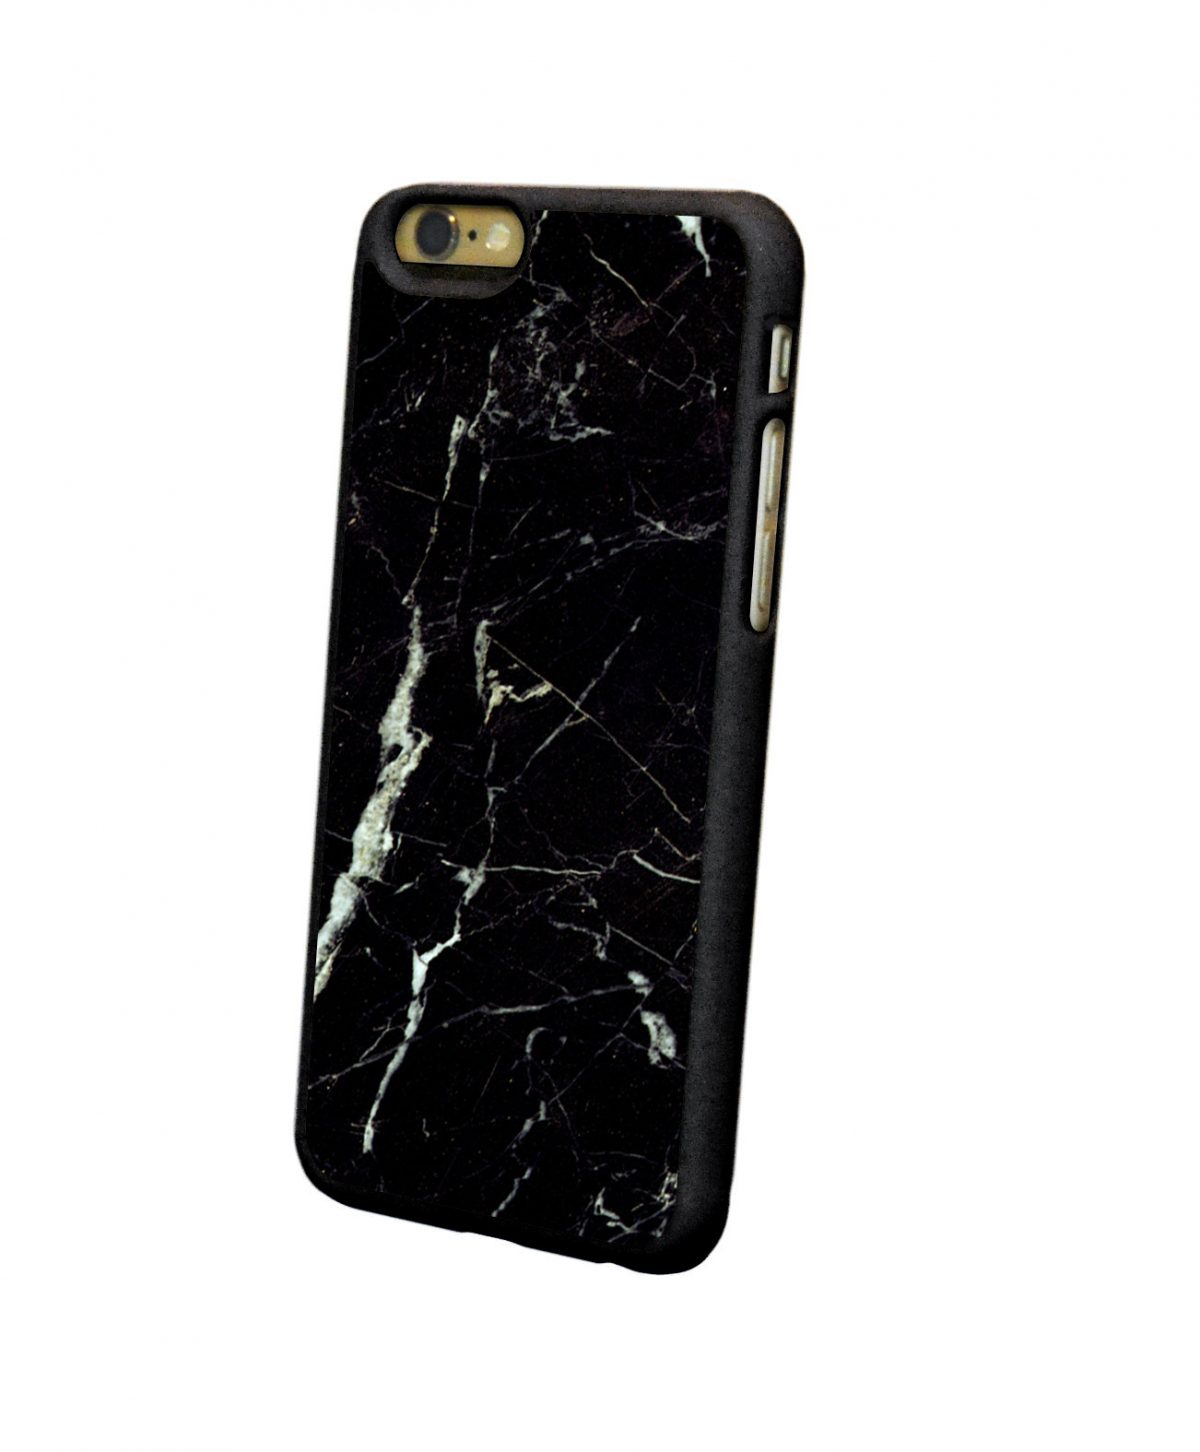 MIKOL 100% Real Marble iPhone 6 Plus Case Is a Natural Beauty